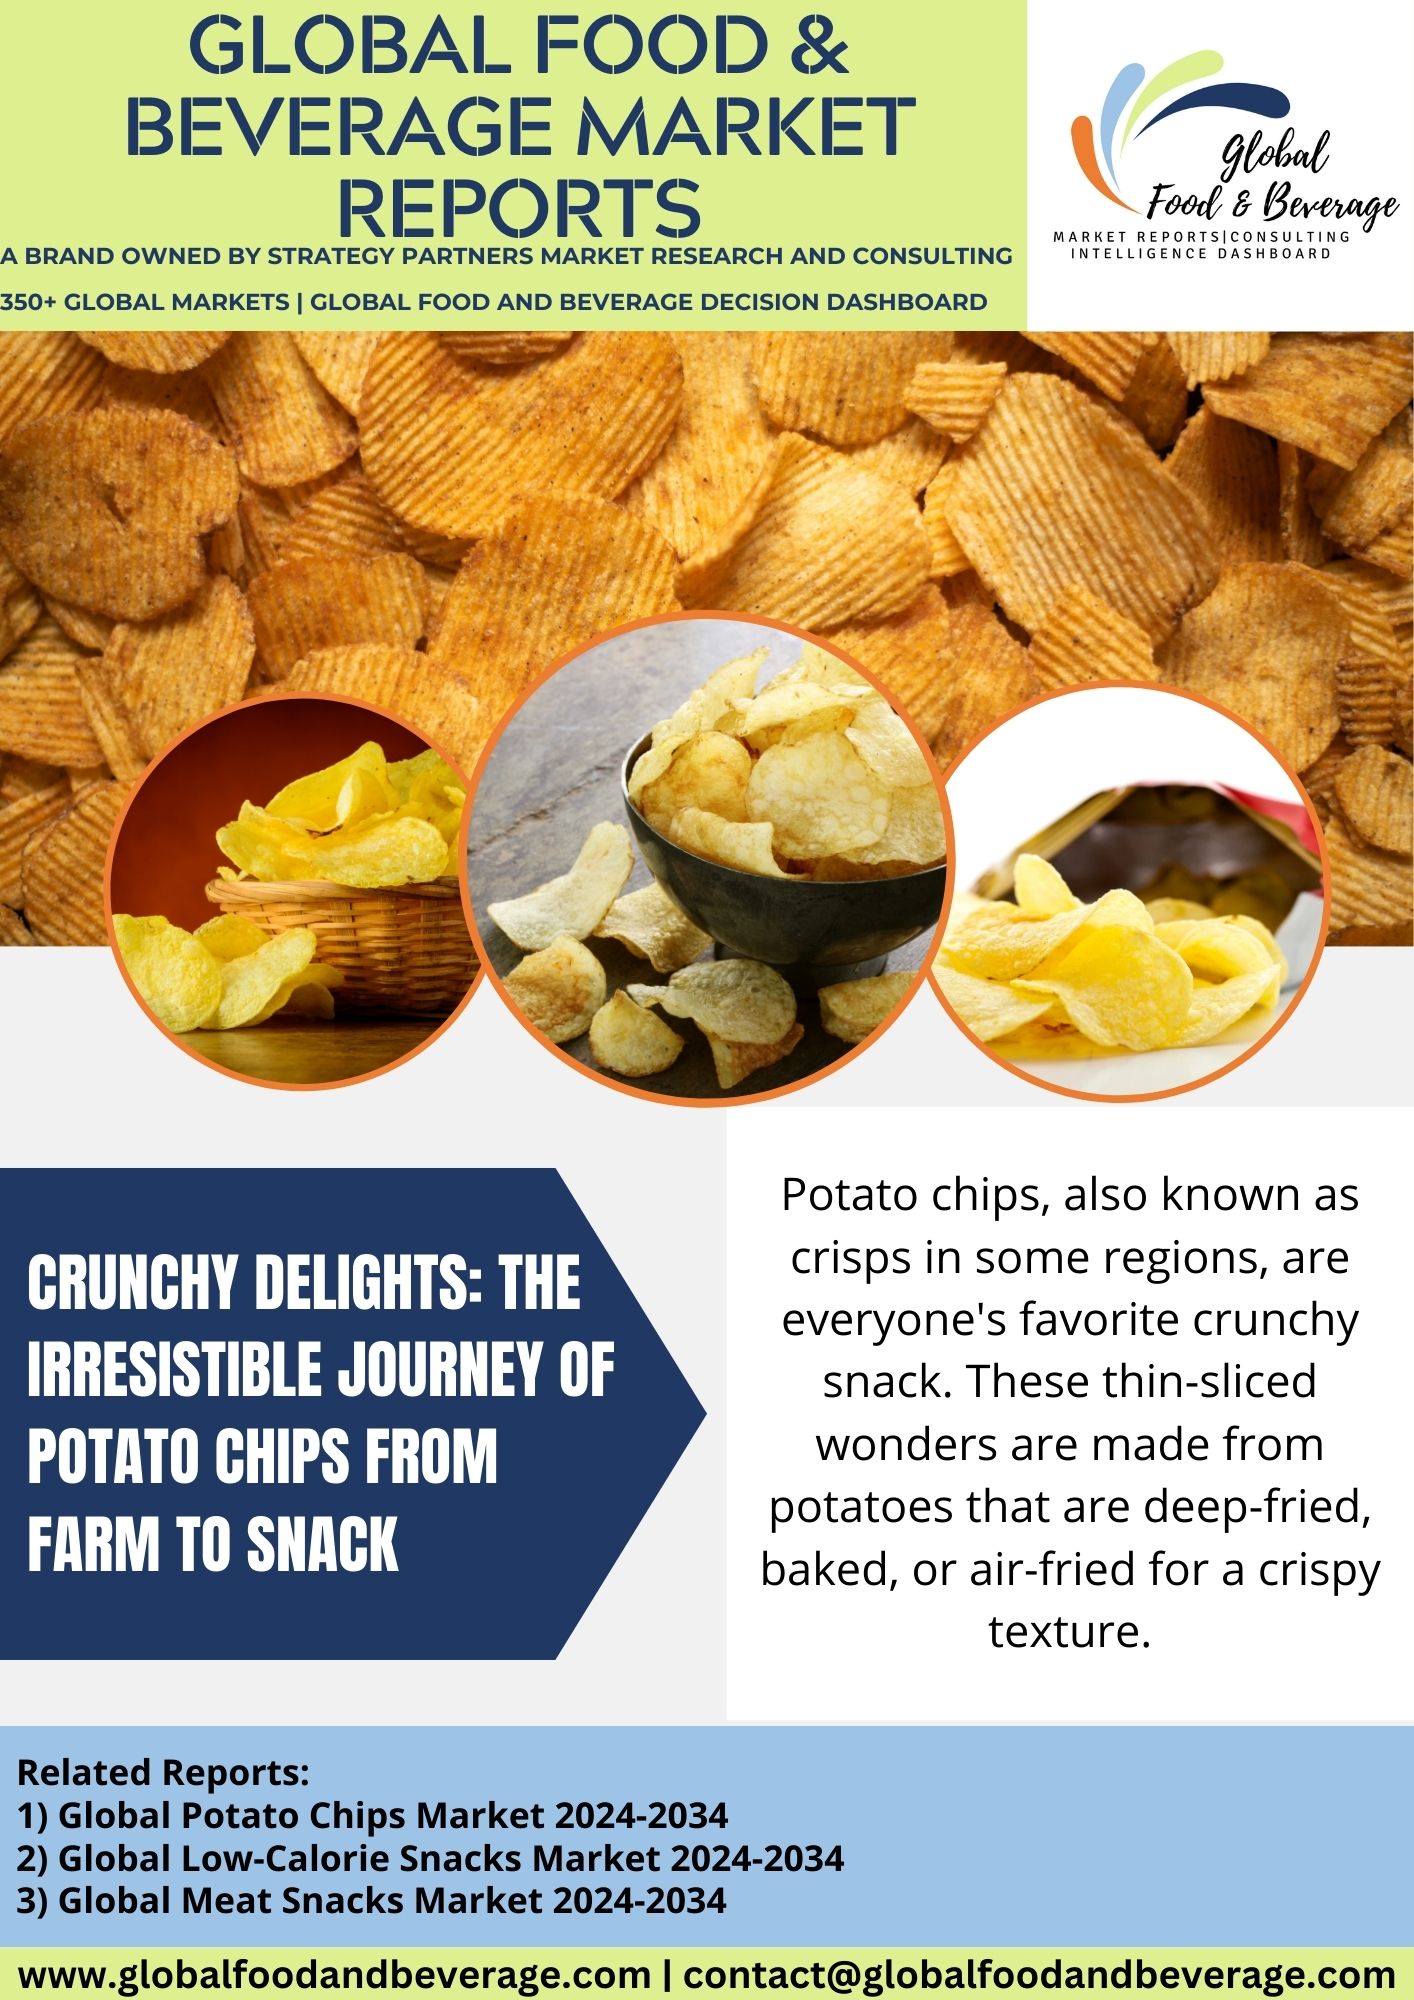 THE IRRESISTIBLE JOURNEY OF POTATO CHIPS   